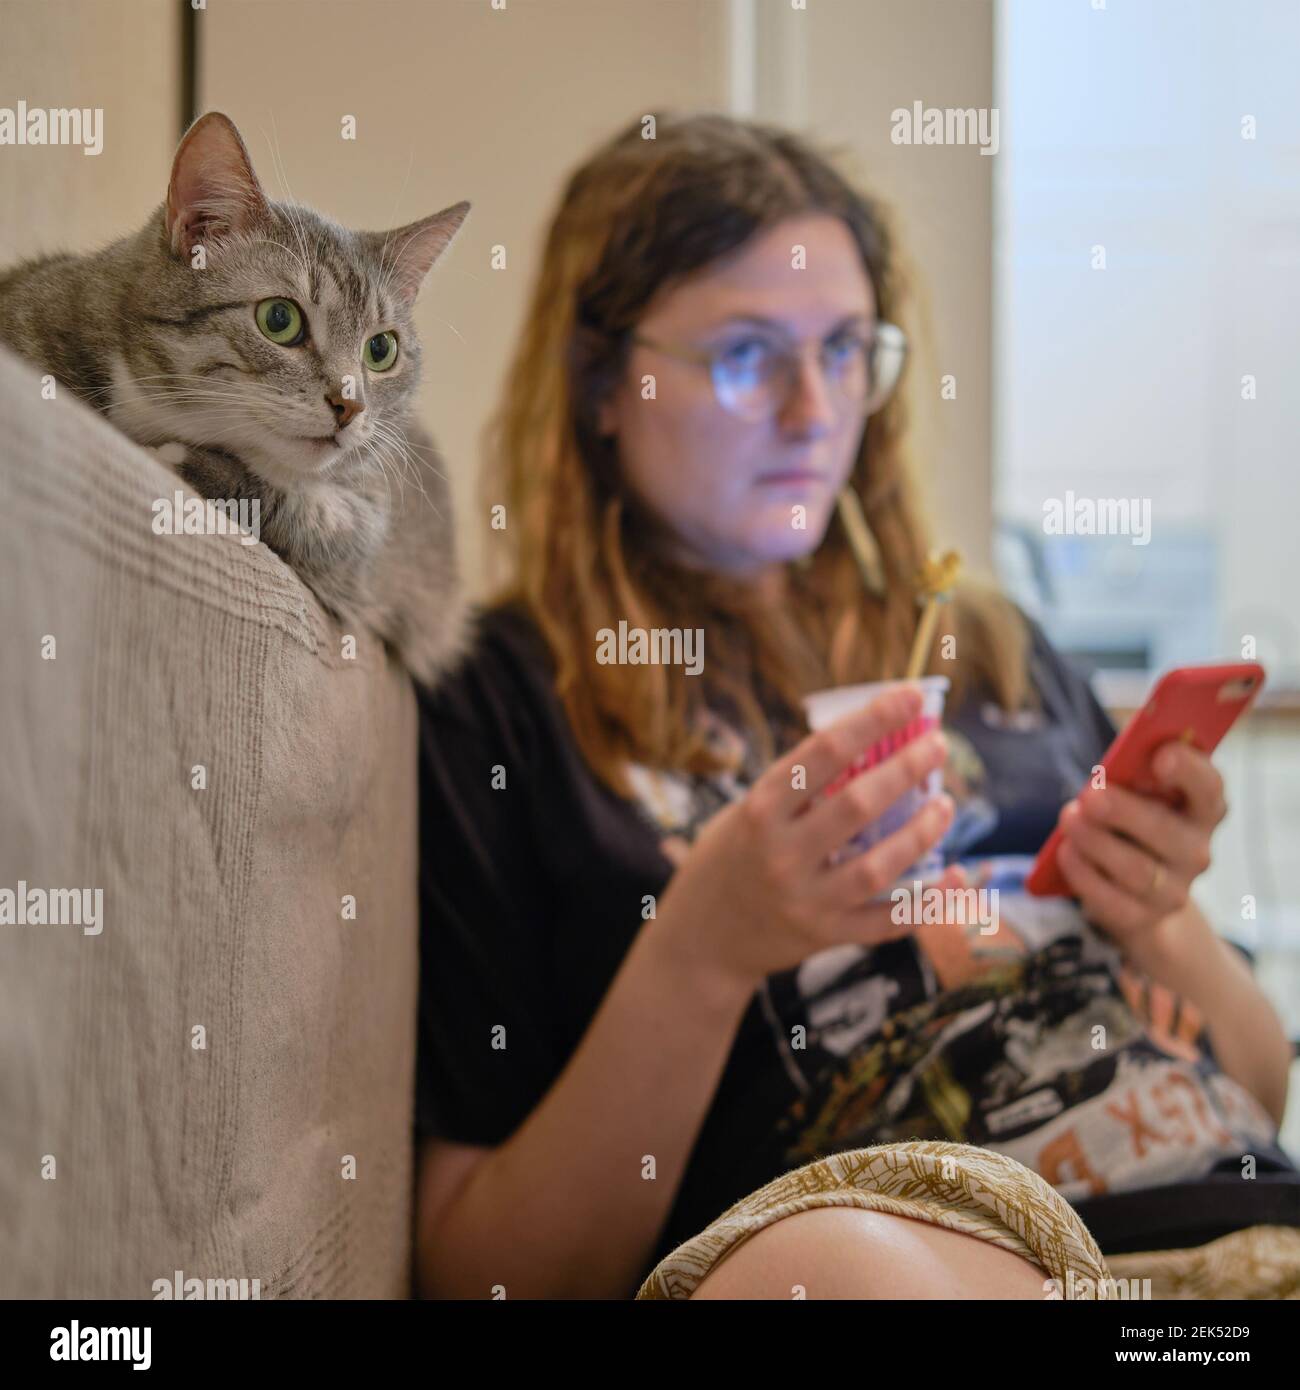 Grey cat watching TV on the sofa next to a woman, close-up portrait Stock Photo